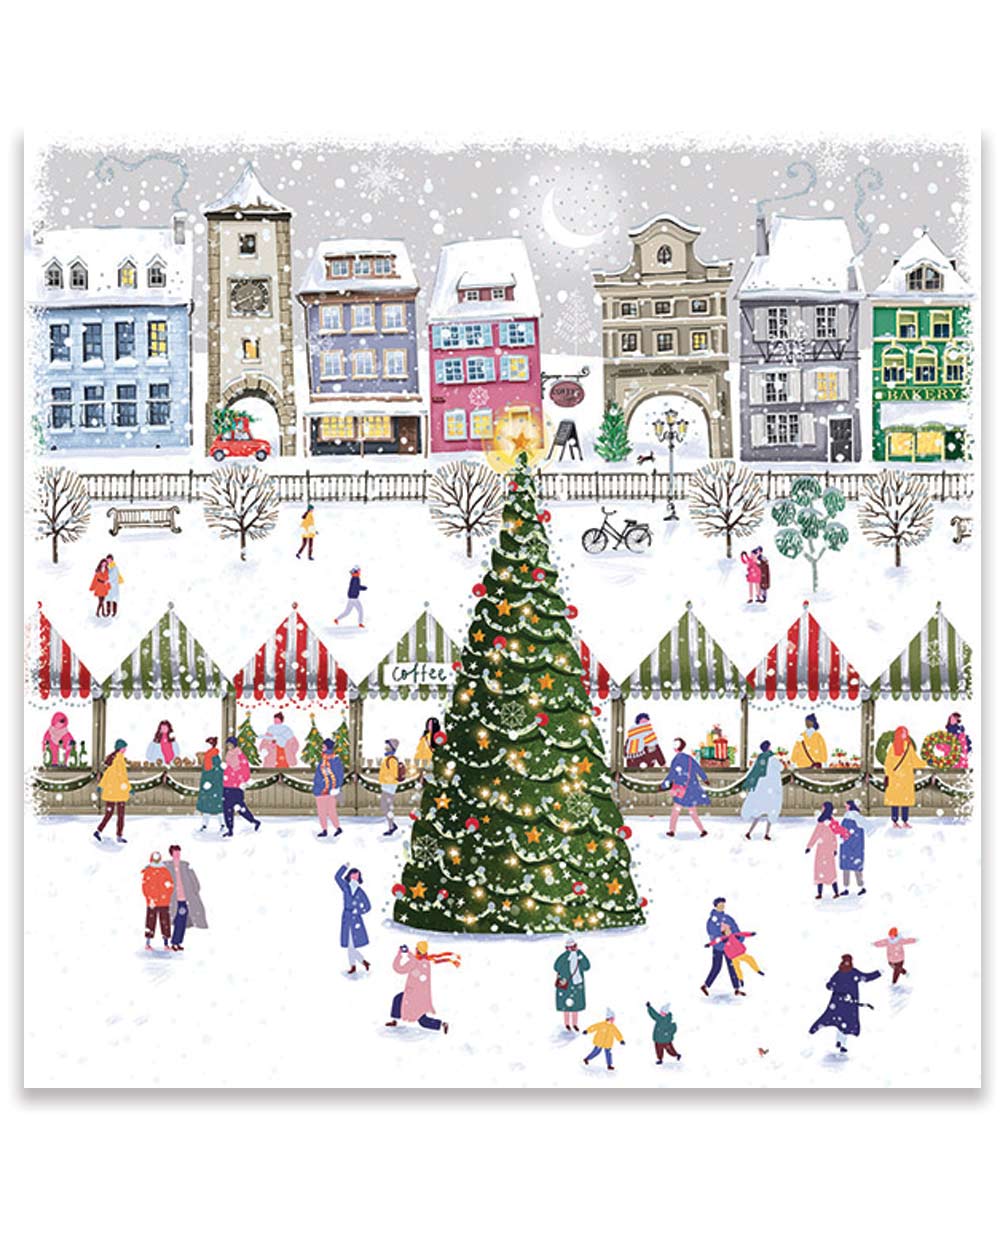 Made in the UK from FSC certified paper and card. The ink has been created from environmentally friendly vegetable inks and all coatings on the cards are water based. Making them 100% recyclable, these cards are definitely on the good list this year.  Adorned with a wintery market scene, with snowball fights around the town hall Christmas tree. 